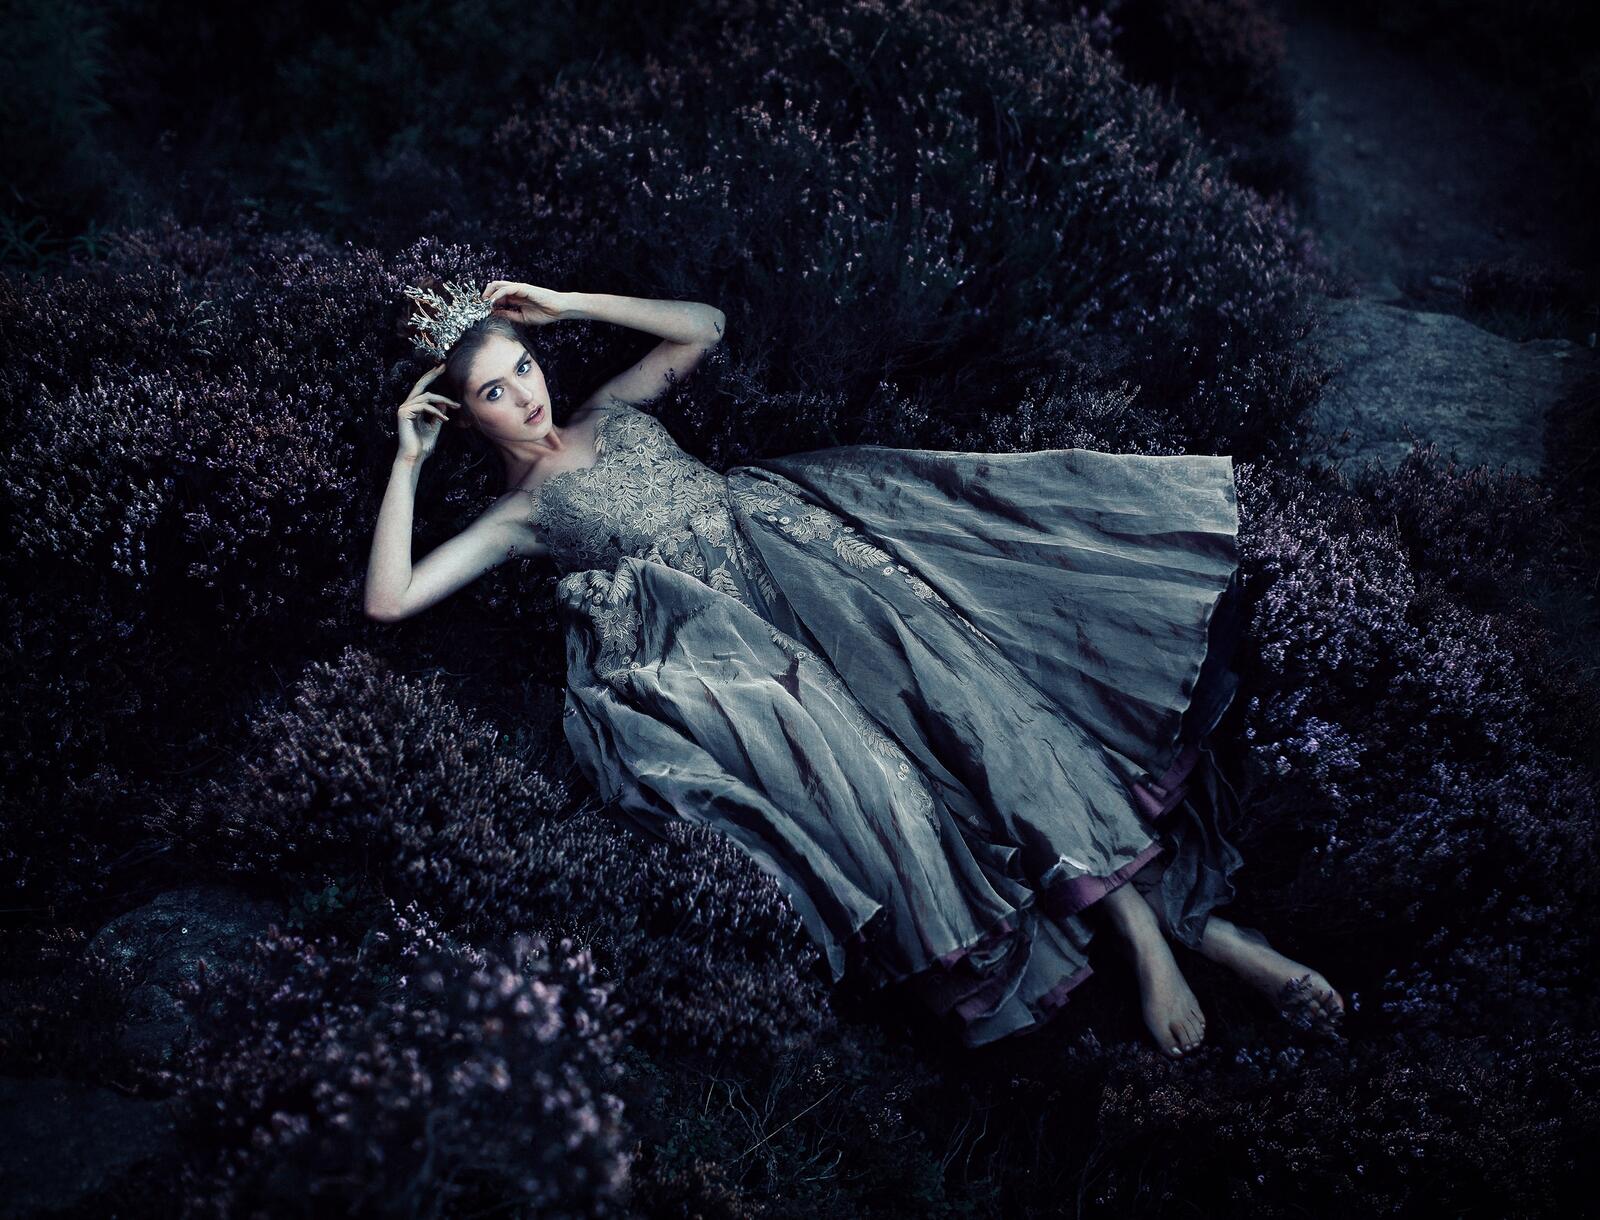 Free photo A girl in a dress lying on a bed of flowers